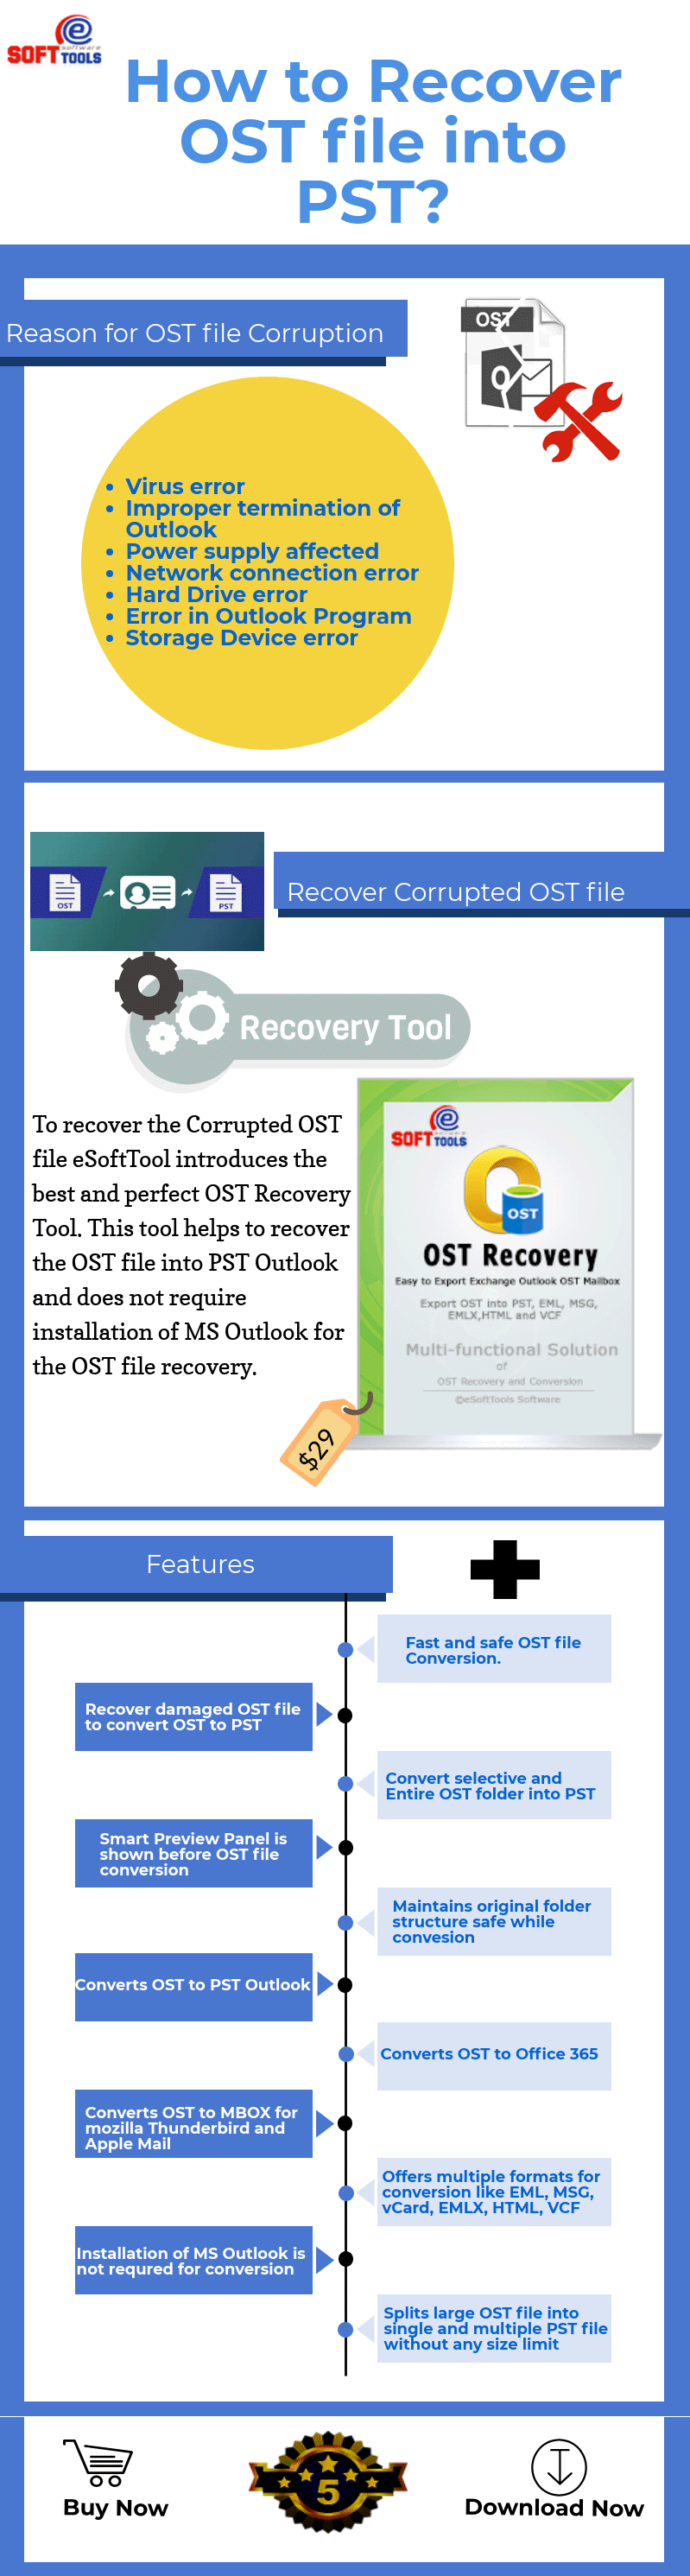 how-to-recover-ost-file.png